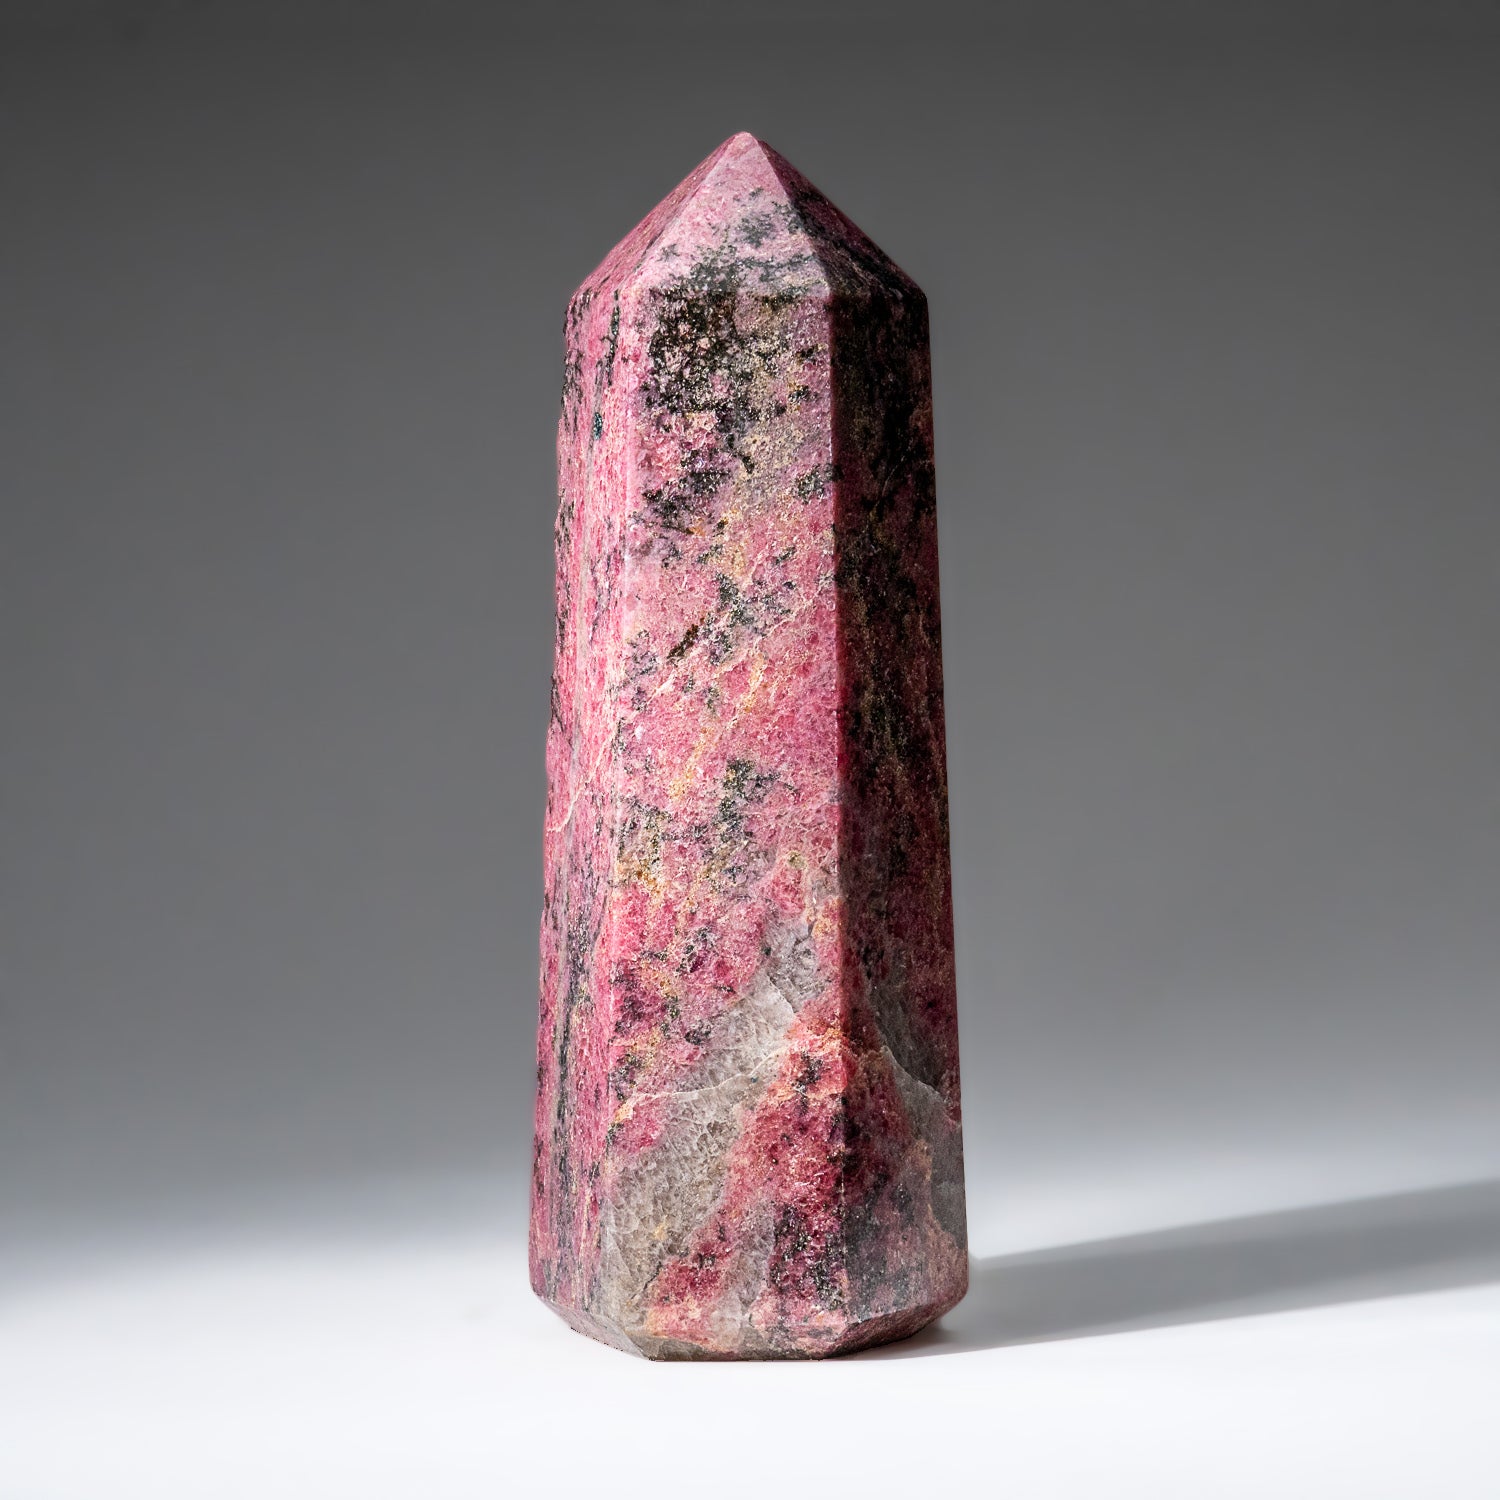 Genuine Polished Imperial Rhodonite Point from Madagascar (2.8 lbs)